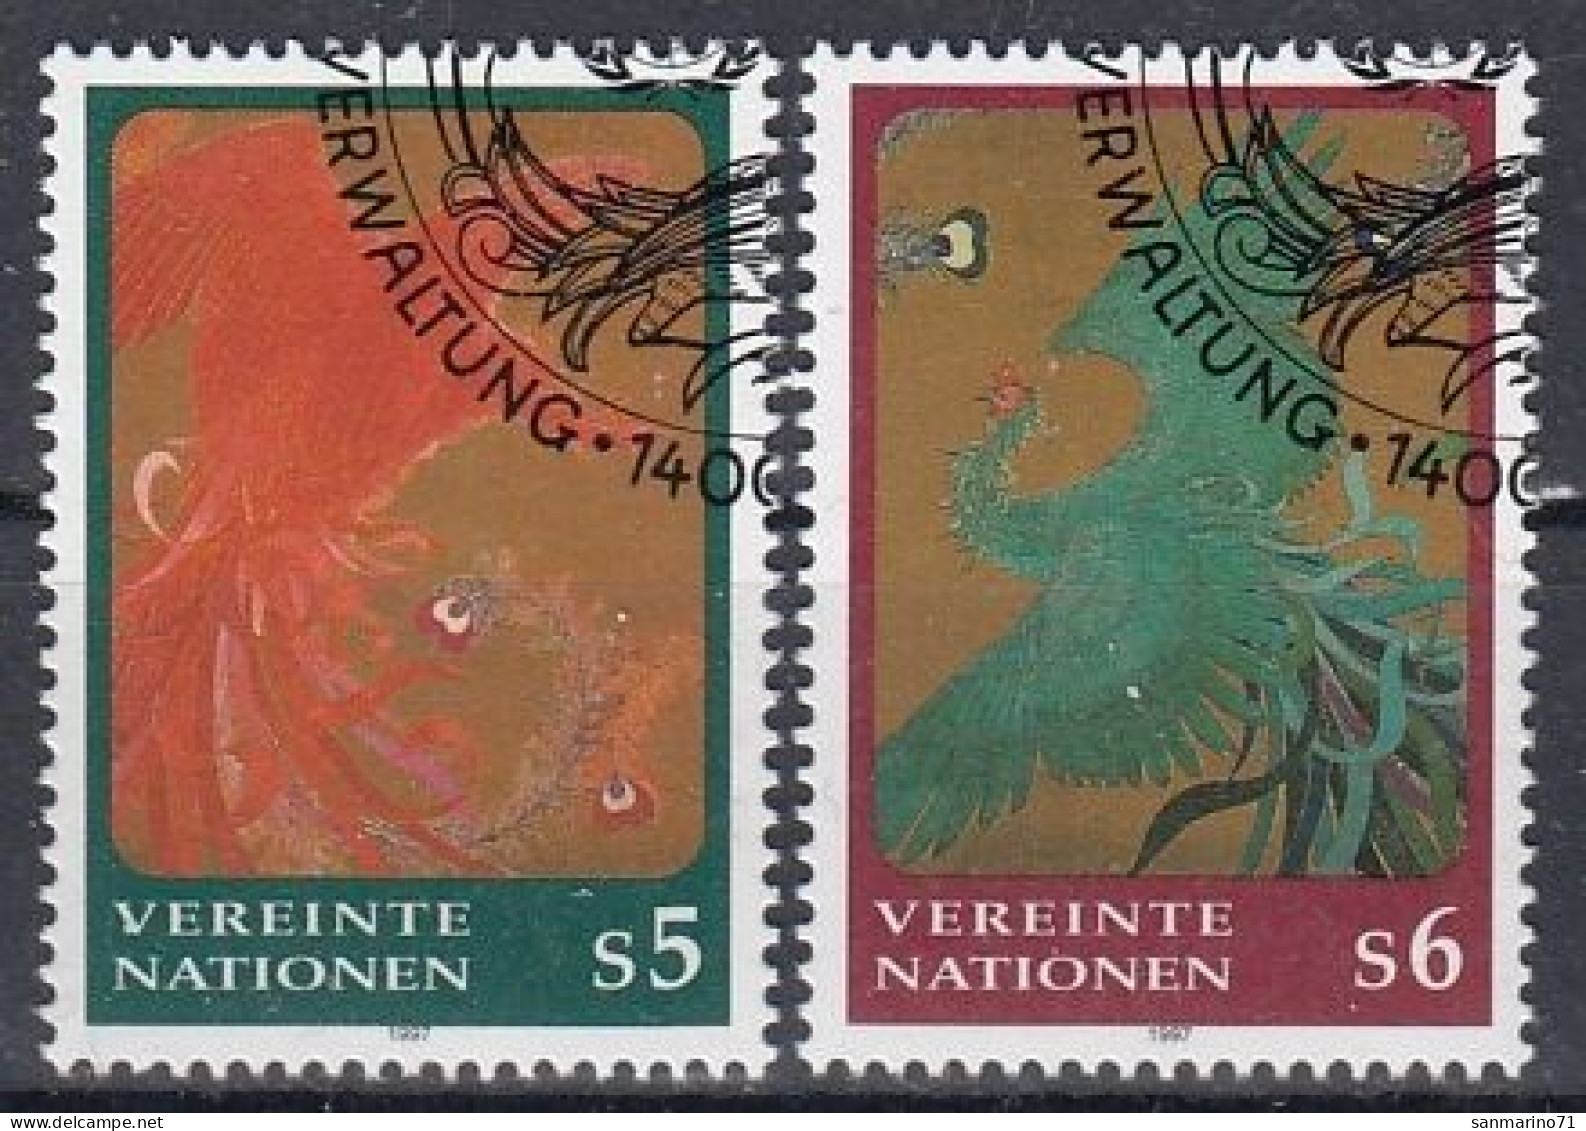 UNITED NATIONS Vienna 220-221,used - Used Stamps